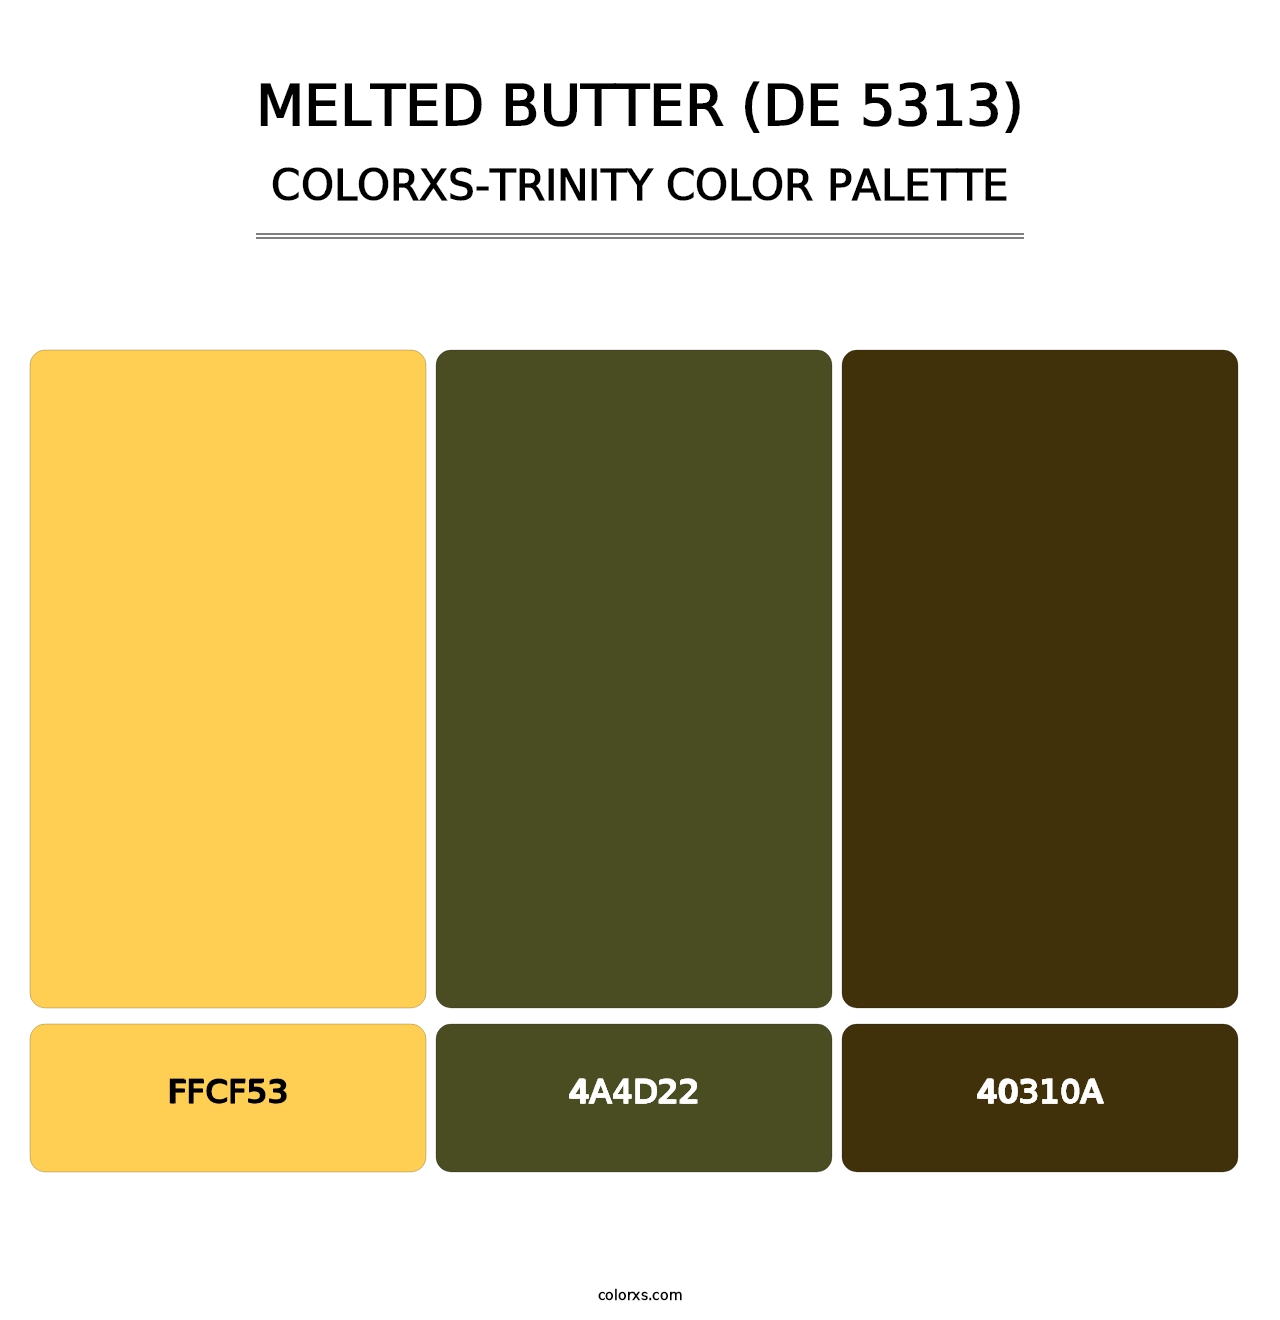 Melted Butter (DE 5313) - Colorxs Trinity Palette